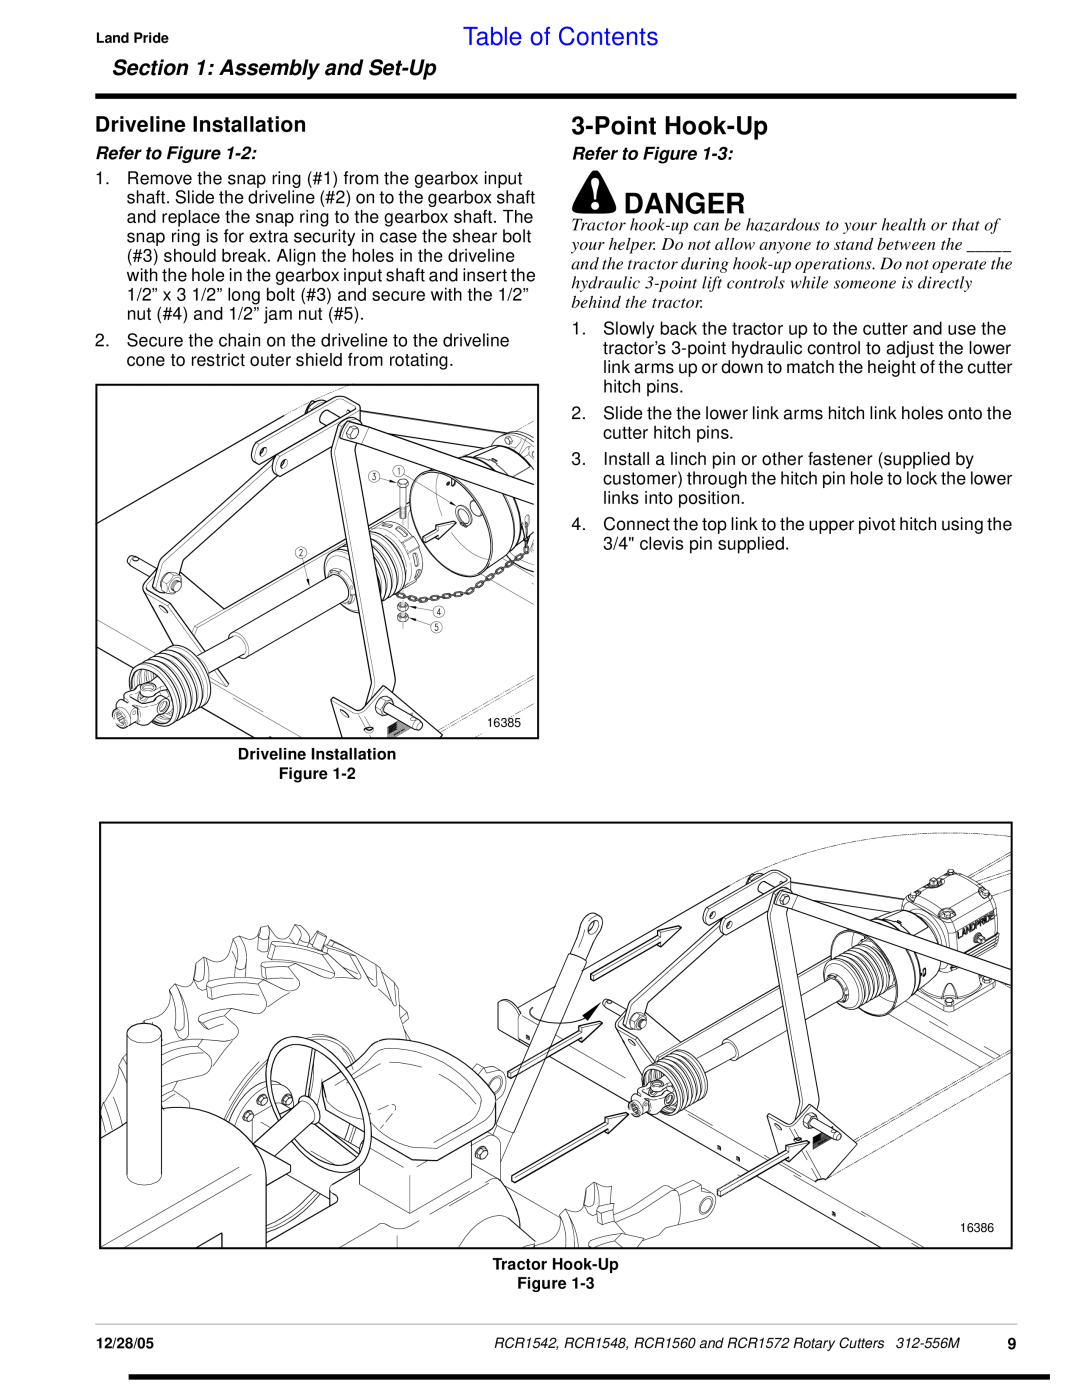 Land Pride RCR1548 Danger, Point Hook-Up, Table of Contents, Driveline Installation, Assembly and Set-Up, Refer to Figure 